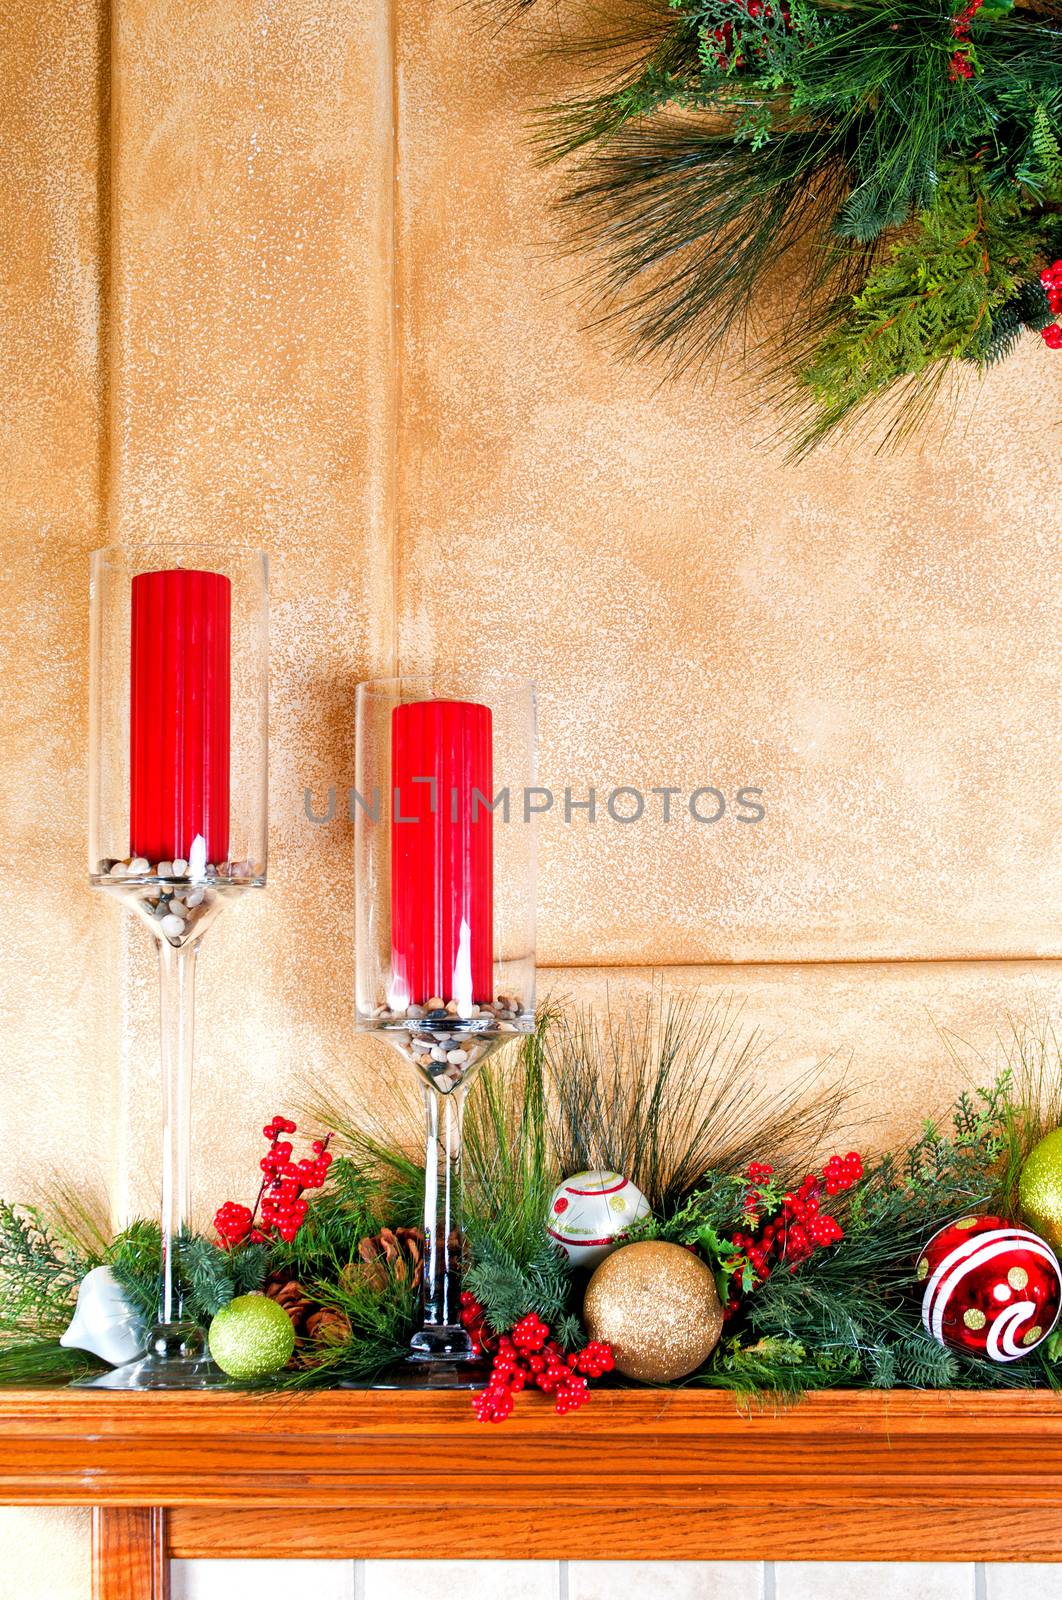 Candles And Christmas Decorations On Fireplace Mantle by rcarner